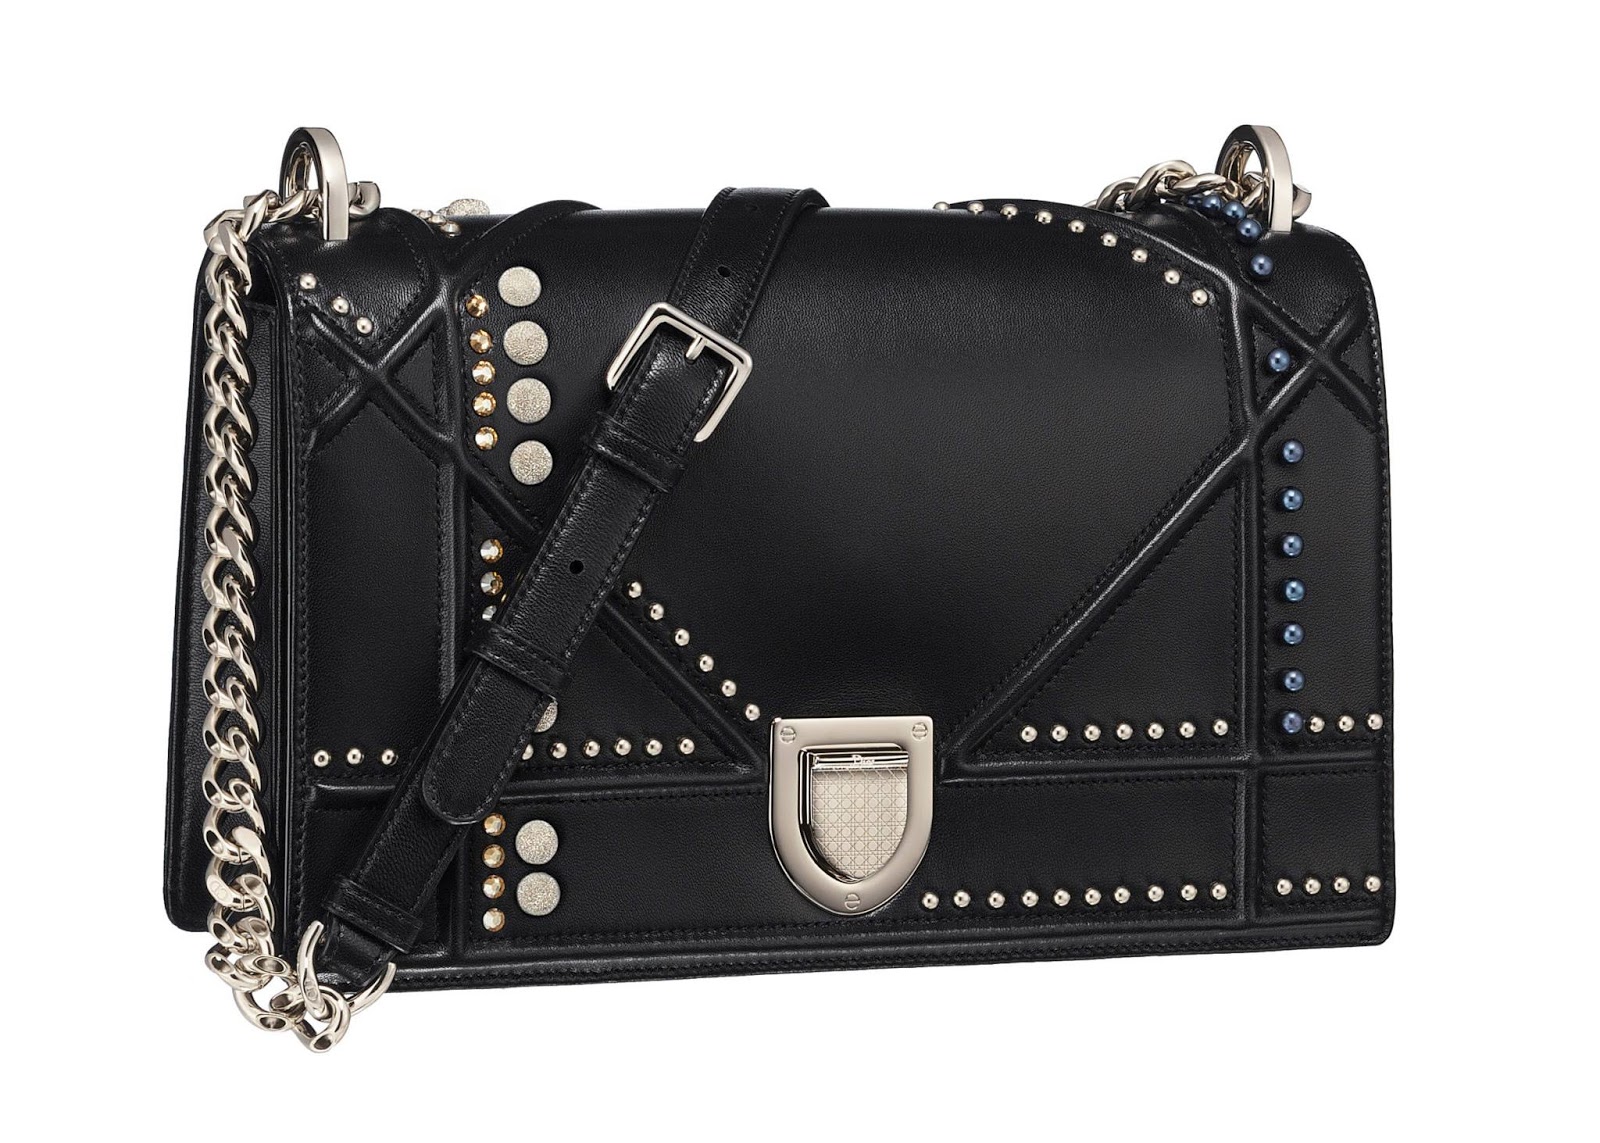 Dior Accessories Selections for Christmas 2015